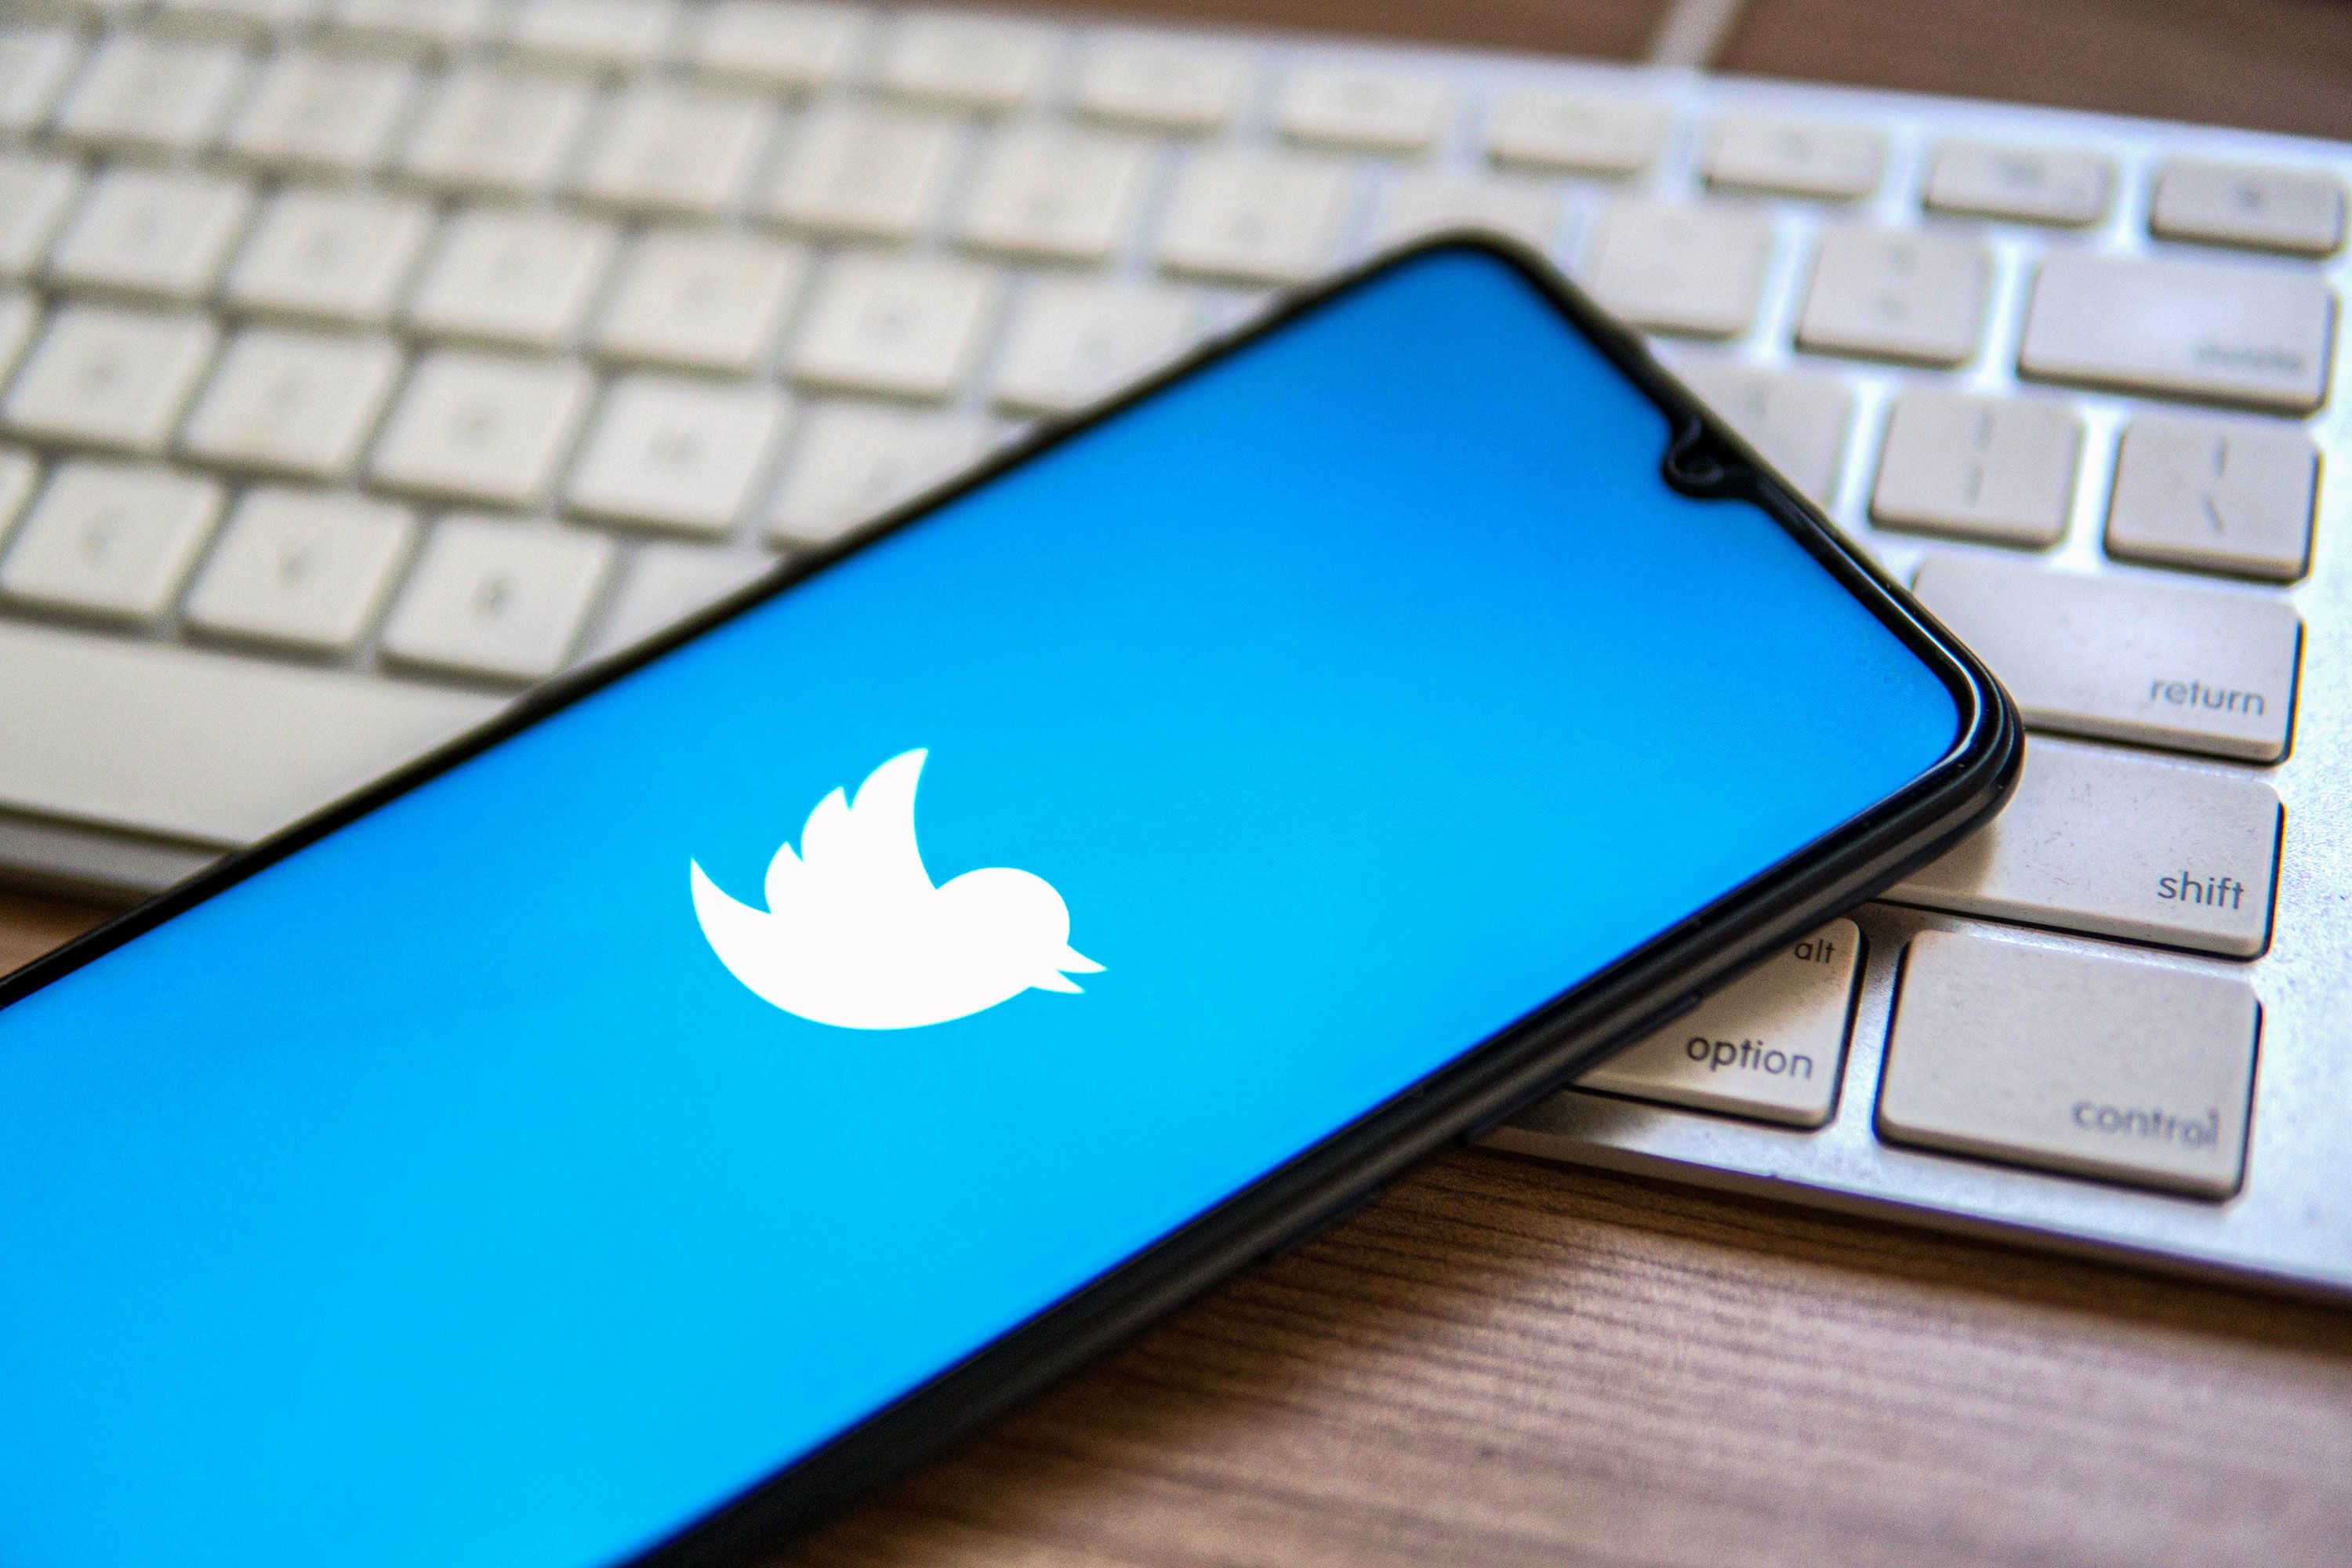 New Twitter rule upsets users who are now limited on how many